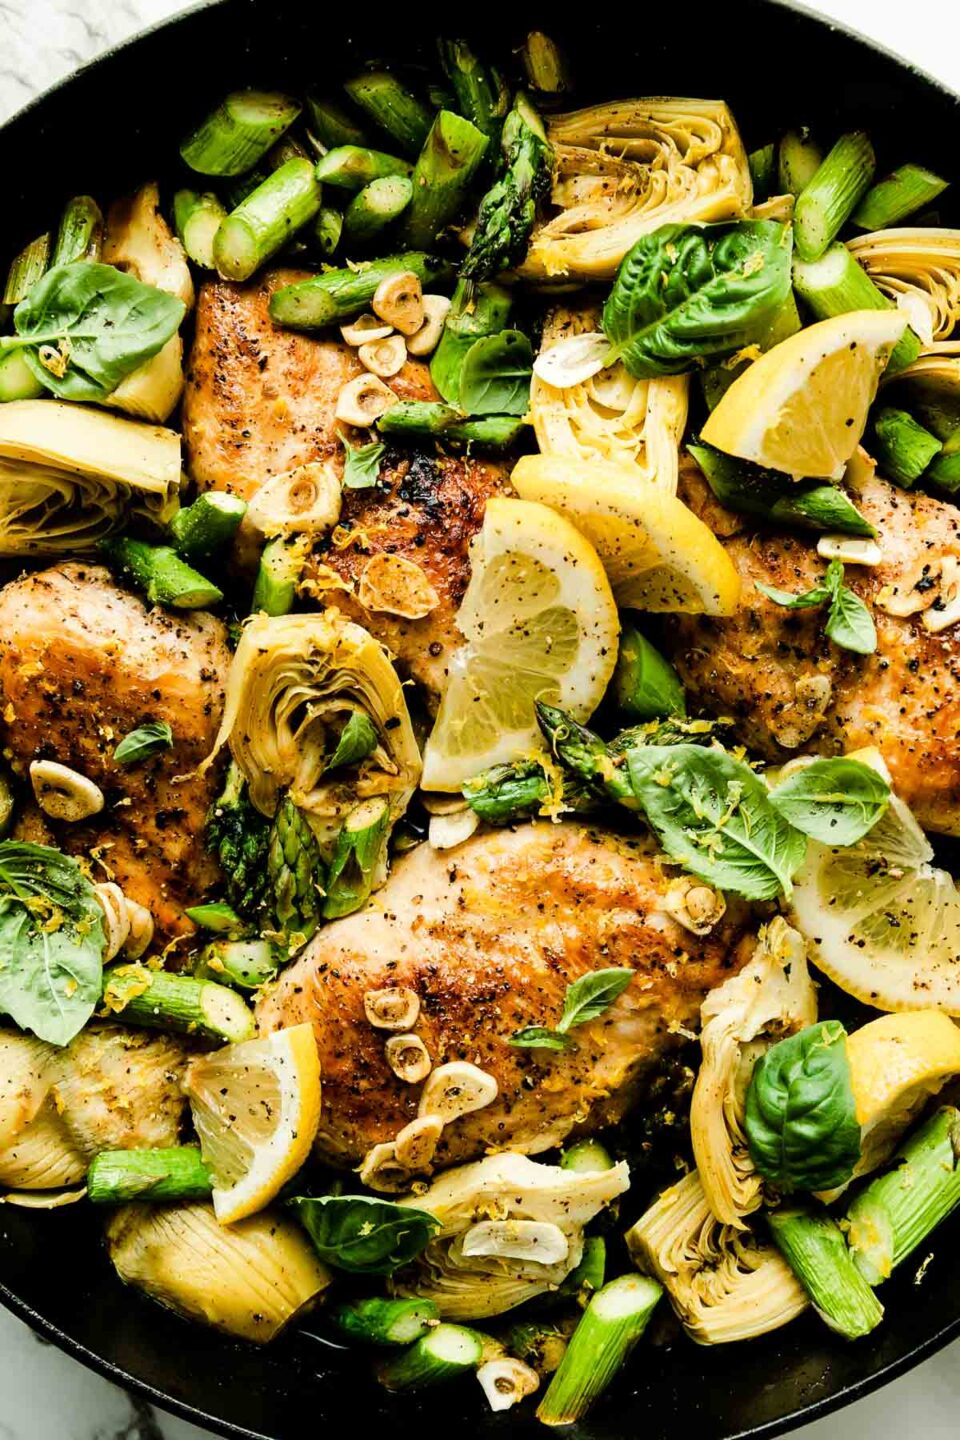 An overhead shot of the baked lemon chicken skillet, with browned chicken breast, chopped asparagus, artichoke hearts and garlic. The skillet is topped with fresh basil leaves and lemon wedges.